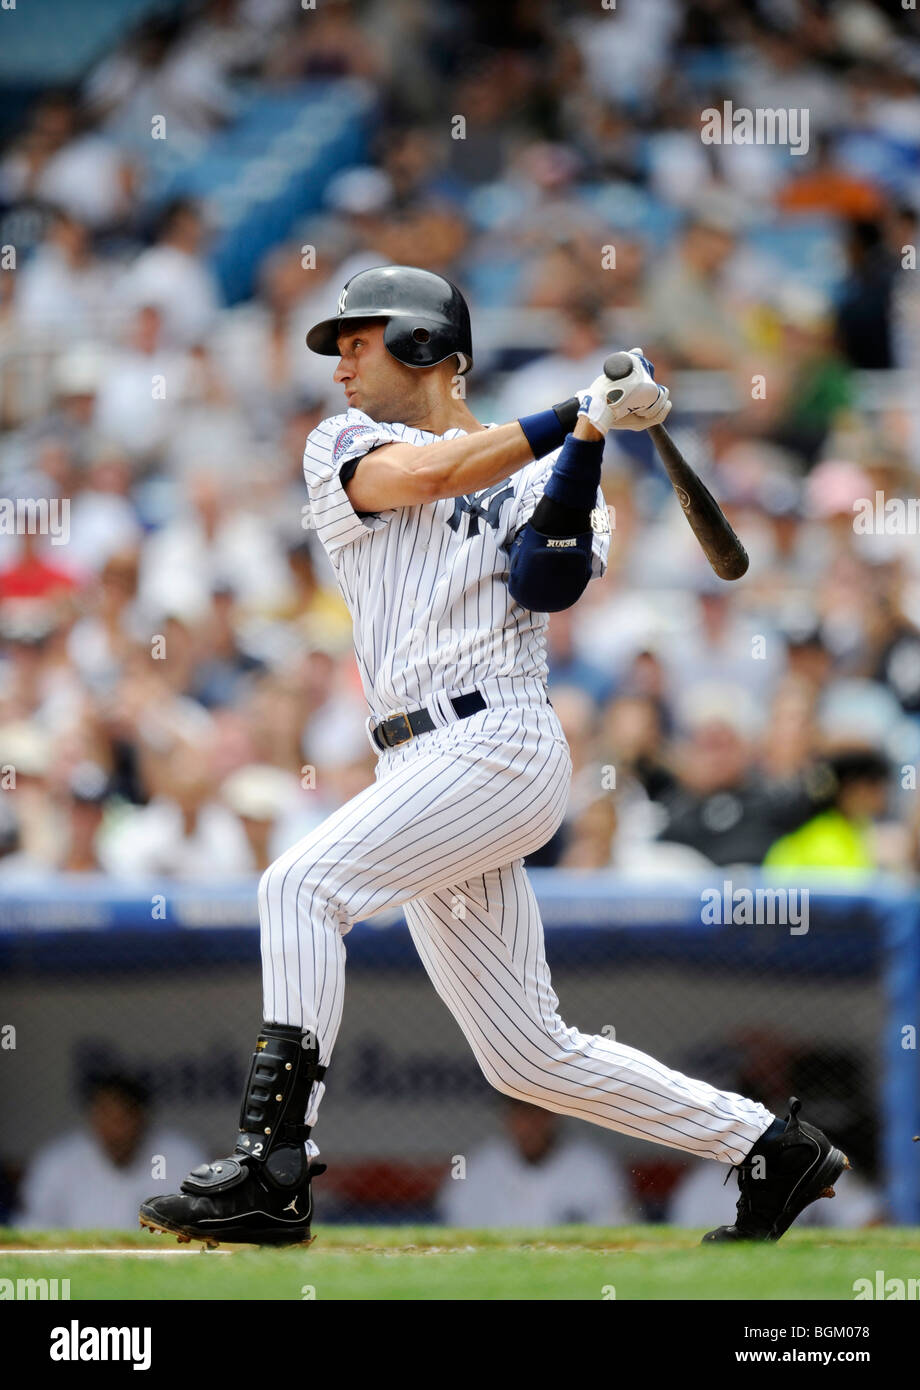 Derek Jeter #2 of the New York Yankees bats against the Tampa Bay Rays  during their game at Yankee Stadium Stock Photo - Alamy